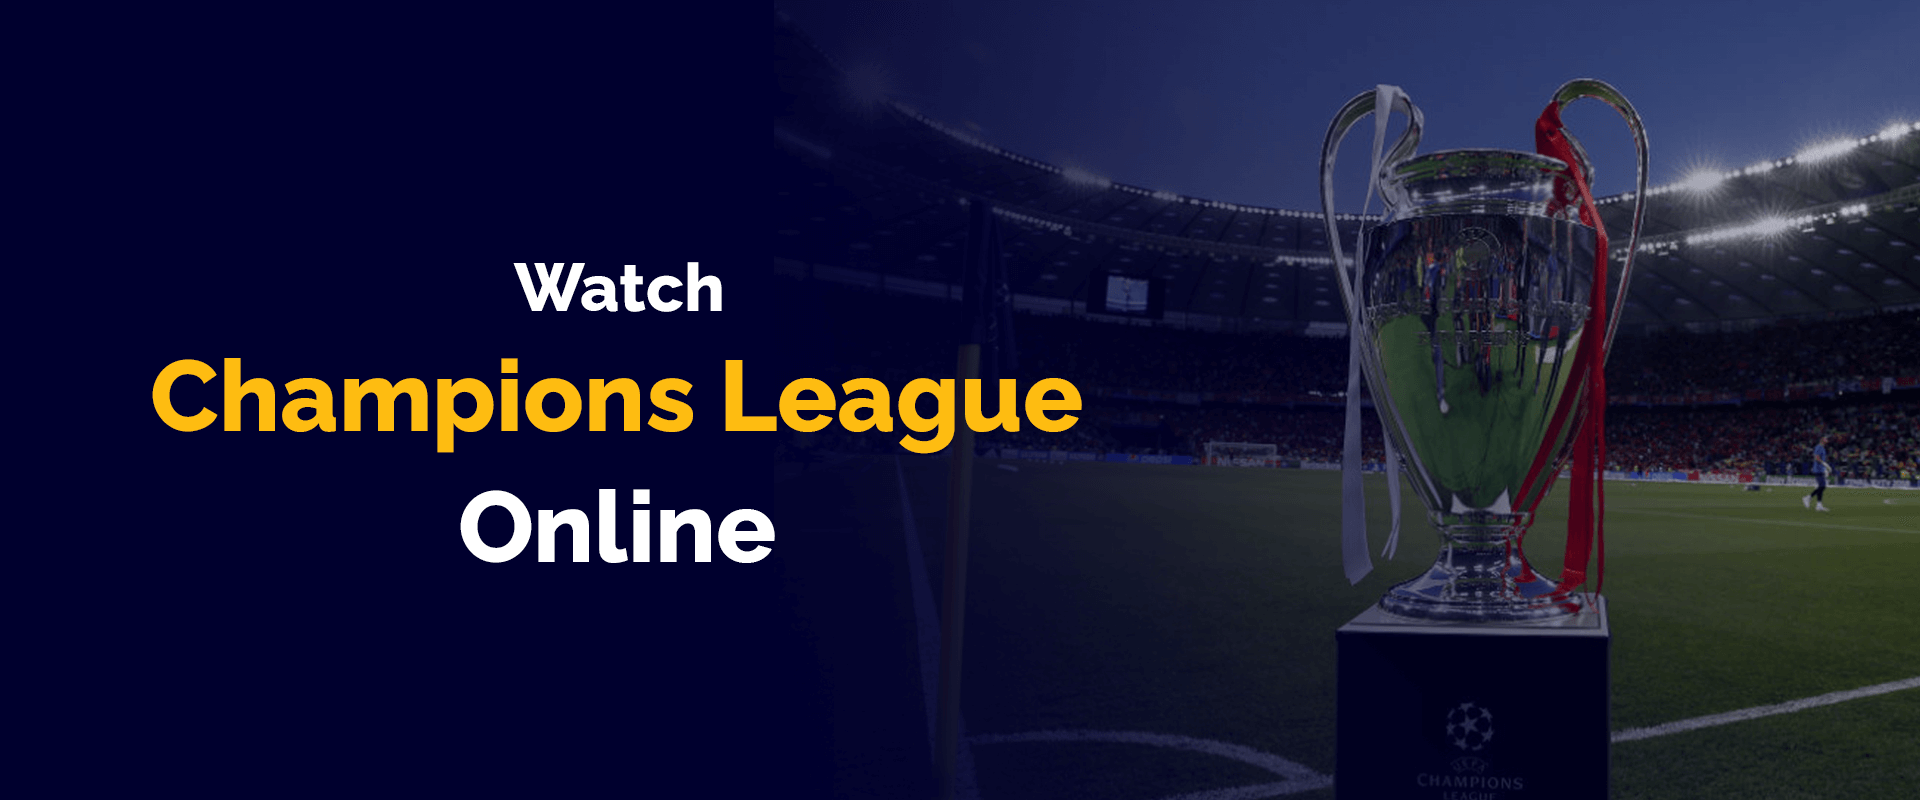 Watch Champions League Final Online Real Madrid vs Liverpool